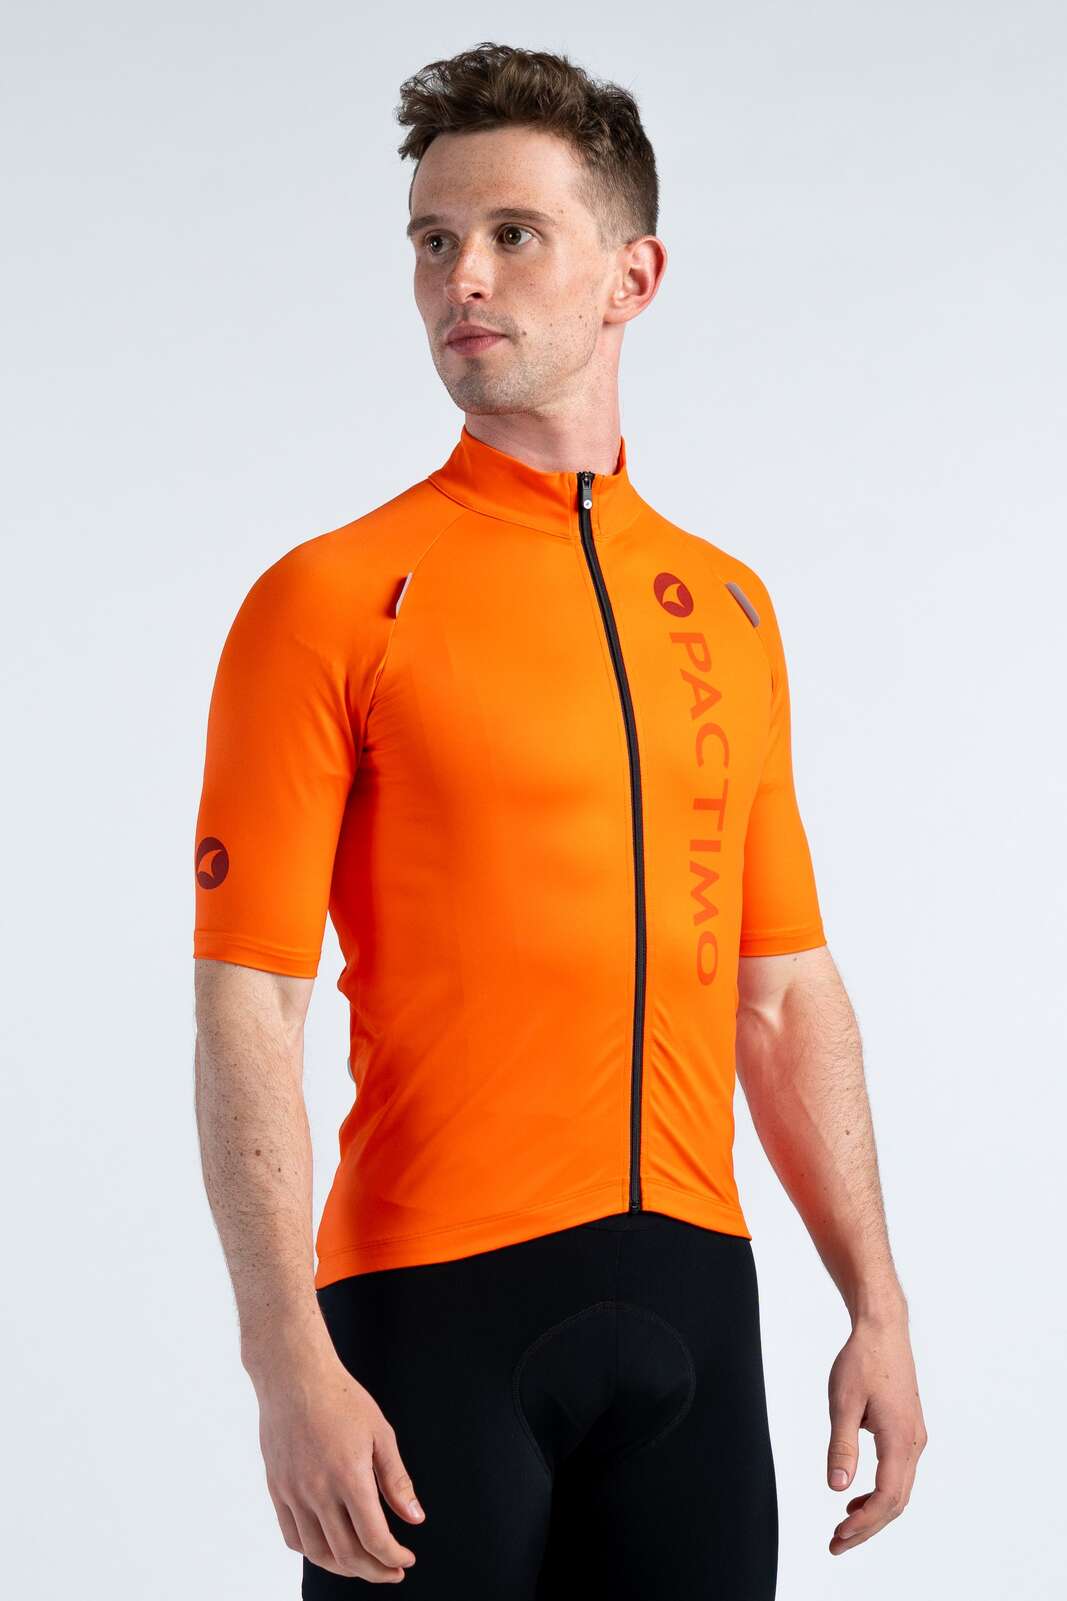 Men's Red/Orange Water Resistant Cycling Jersey - Front View